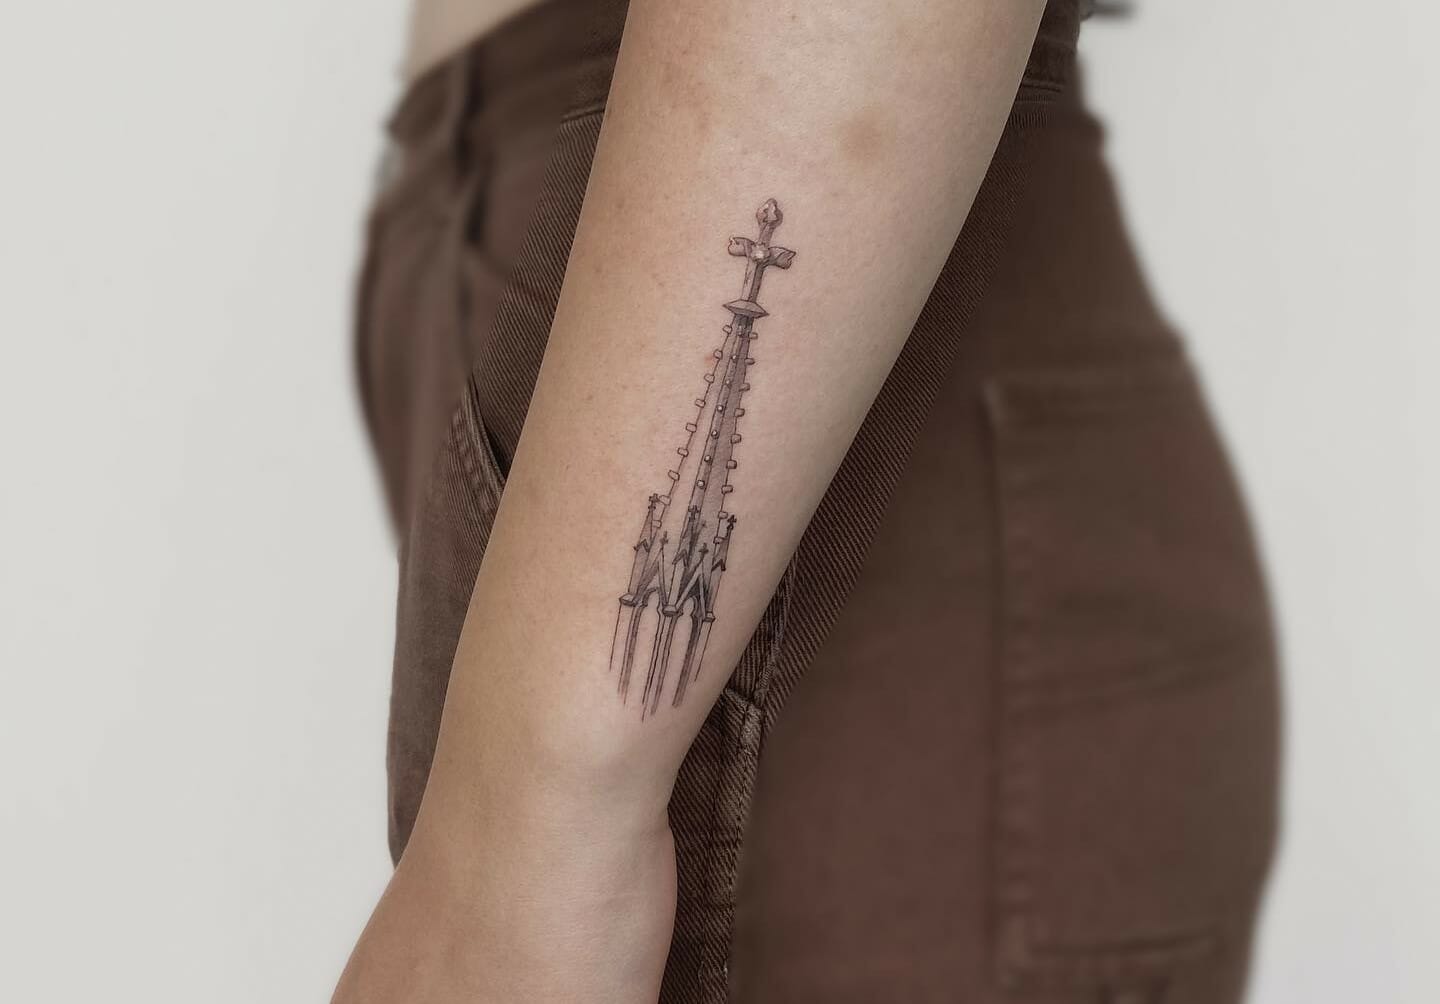 Tattoo Artist: Cagri Durmaz. Tags: categories, Minimalist, Line Art, Fine  Line, Other, Architectur… | Tiny tattoos for women, Cute ankle tattoos,  Small house tattoo